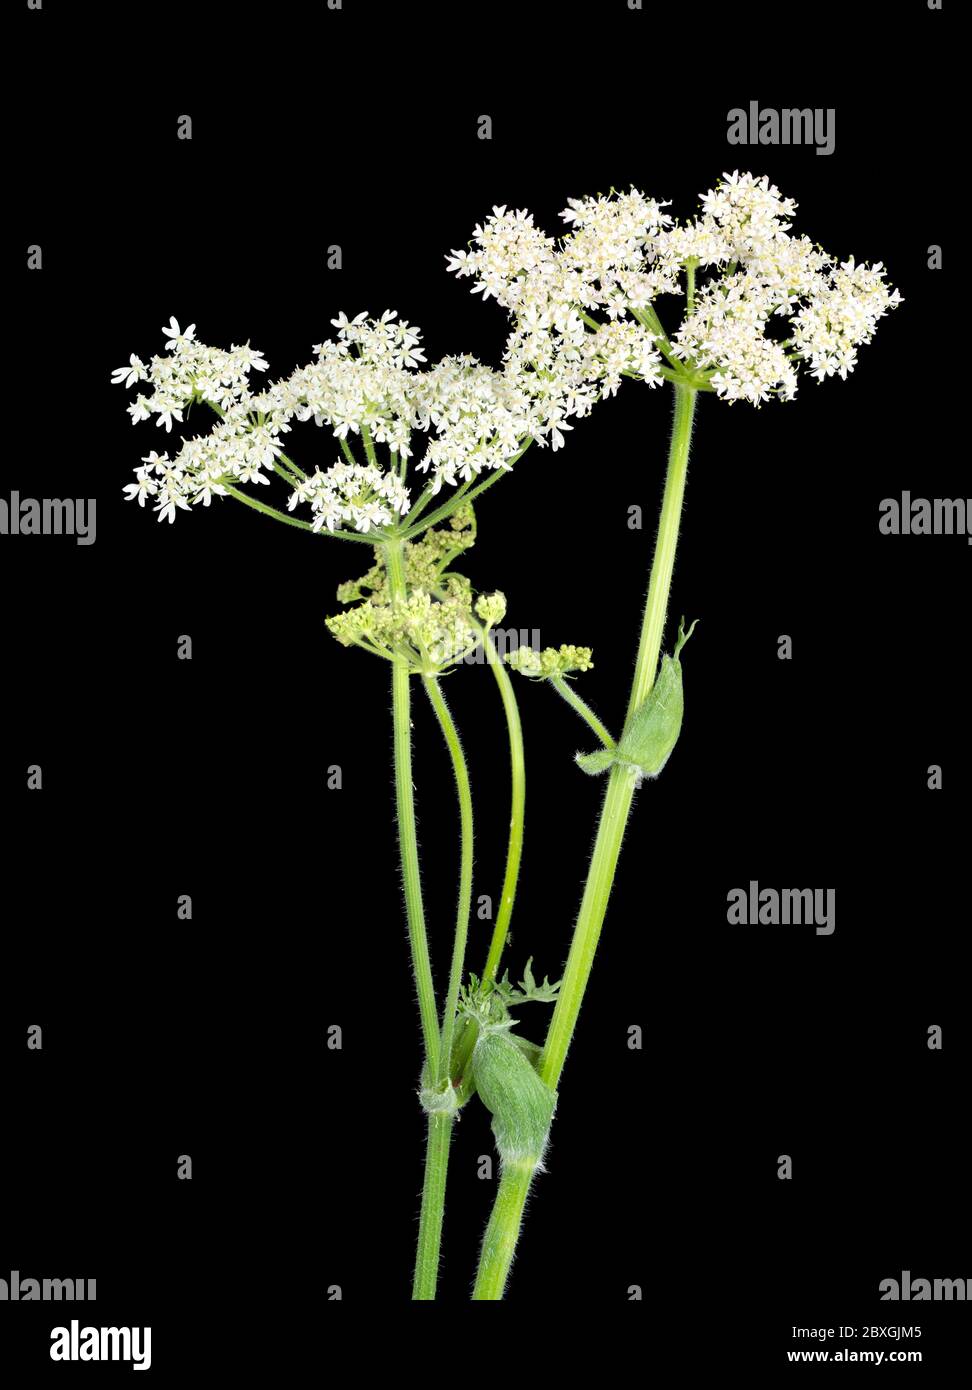 Flower head of the white form of the UK biennial wildflower, Heracleum spondylium, on a black background Stock Photo